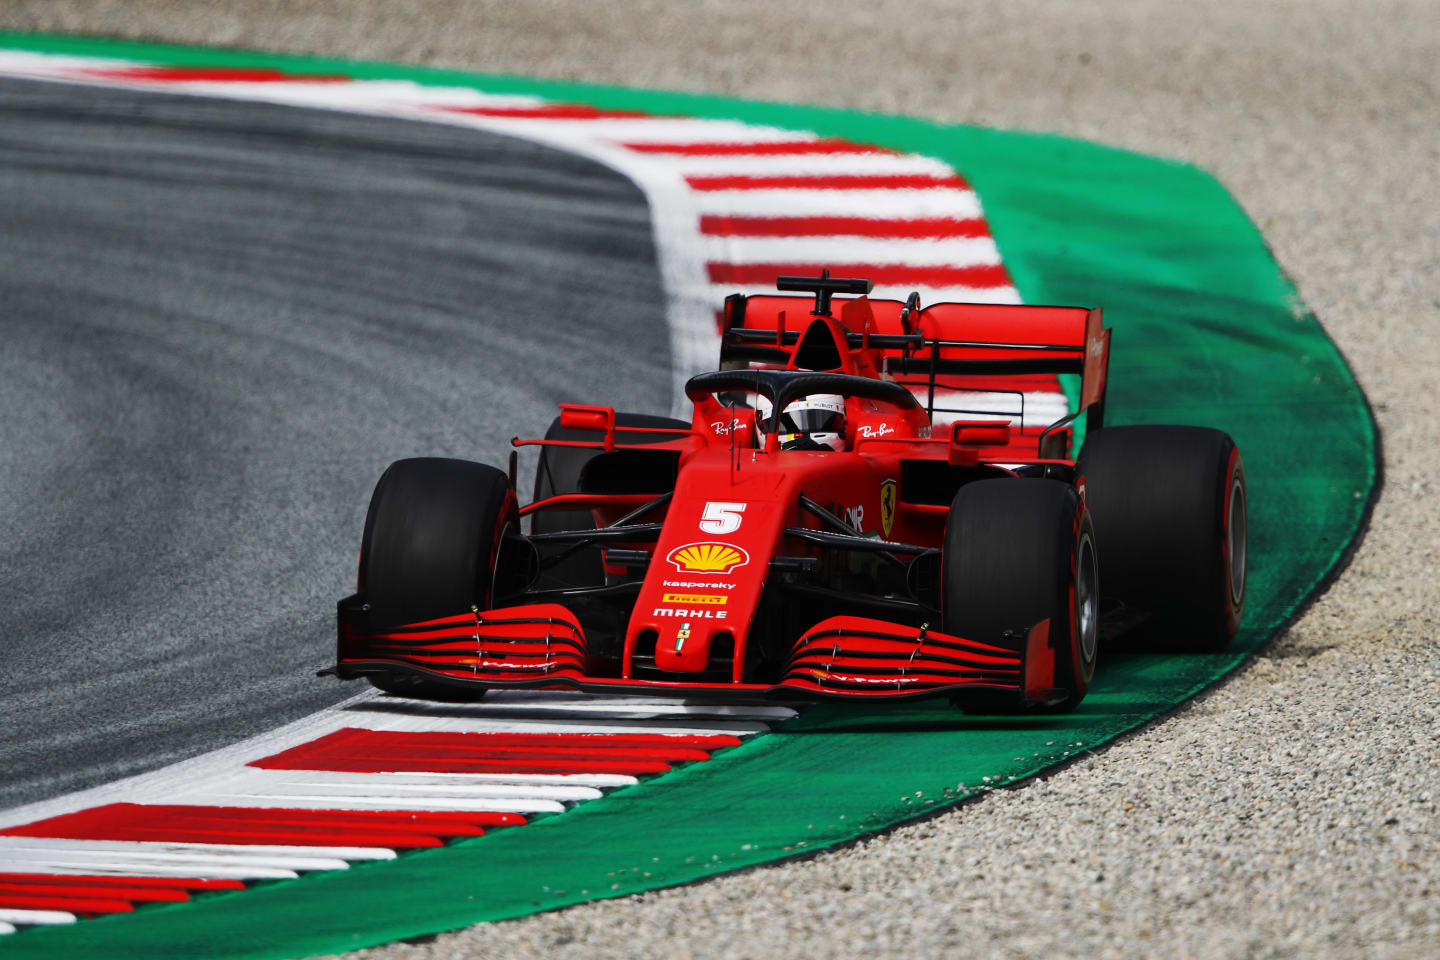 SPIELBERG, AUSTRIA - JULY 03: Sebastian Vettel of Germany driving the (5) Scuderia Ferrari SF1000 on track during practice for the F1 Grand Prix of Austria at Red Bull Ring on July 03, 2020 in Spielberg, Austria. (Photo by Bryn Lennon/Getty Images)